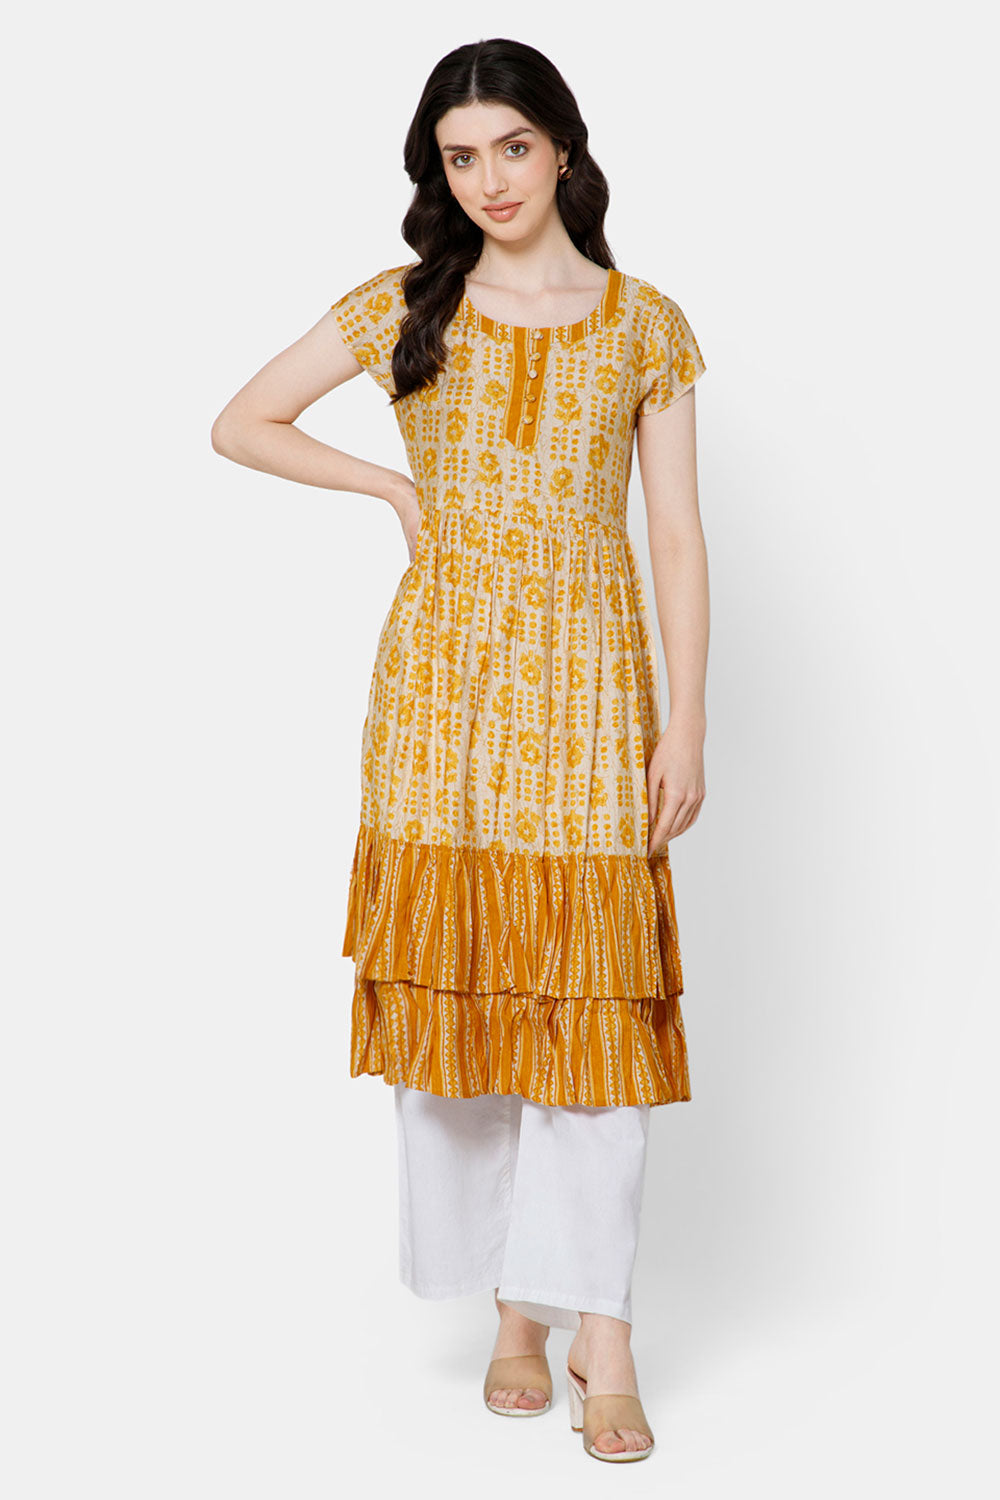 Mythri Women's Fit and Flare Casual Dress - Mustard - DR04